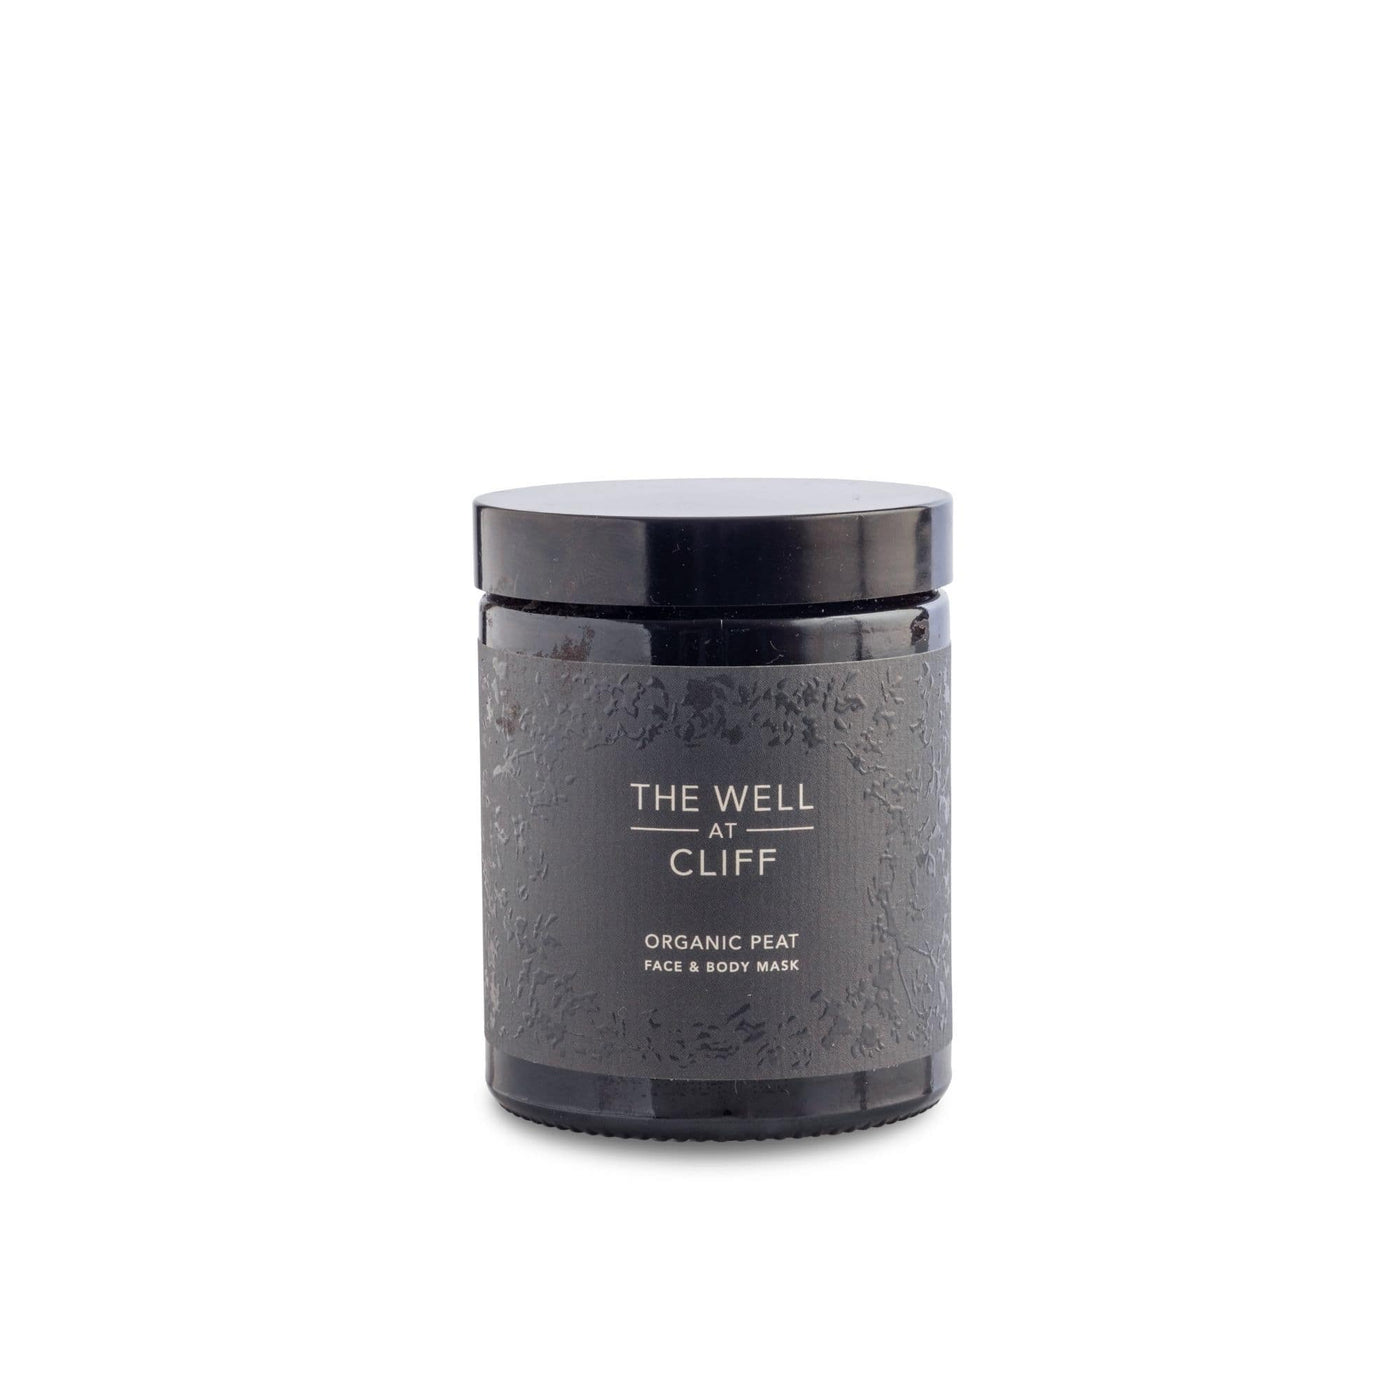 The Well at Cliff Beauty Revitalising Face & Body Peat Mask